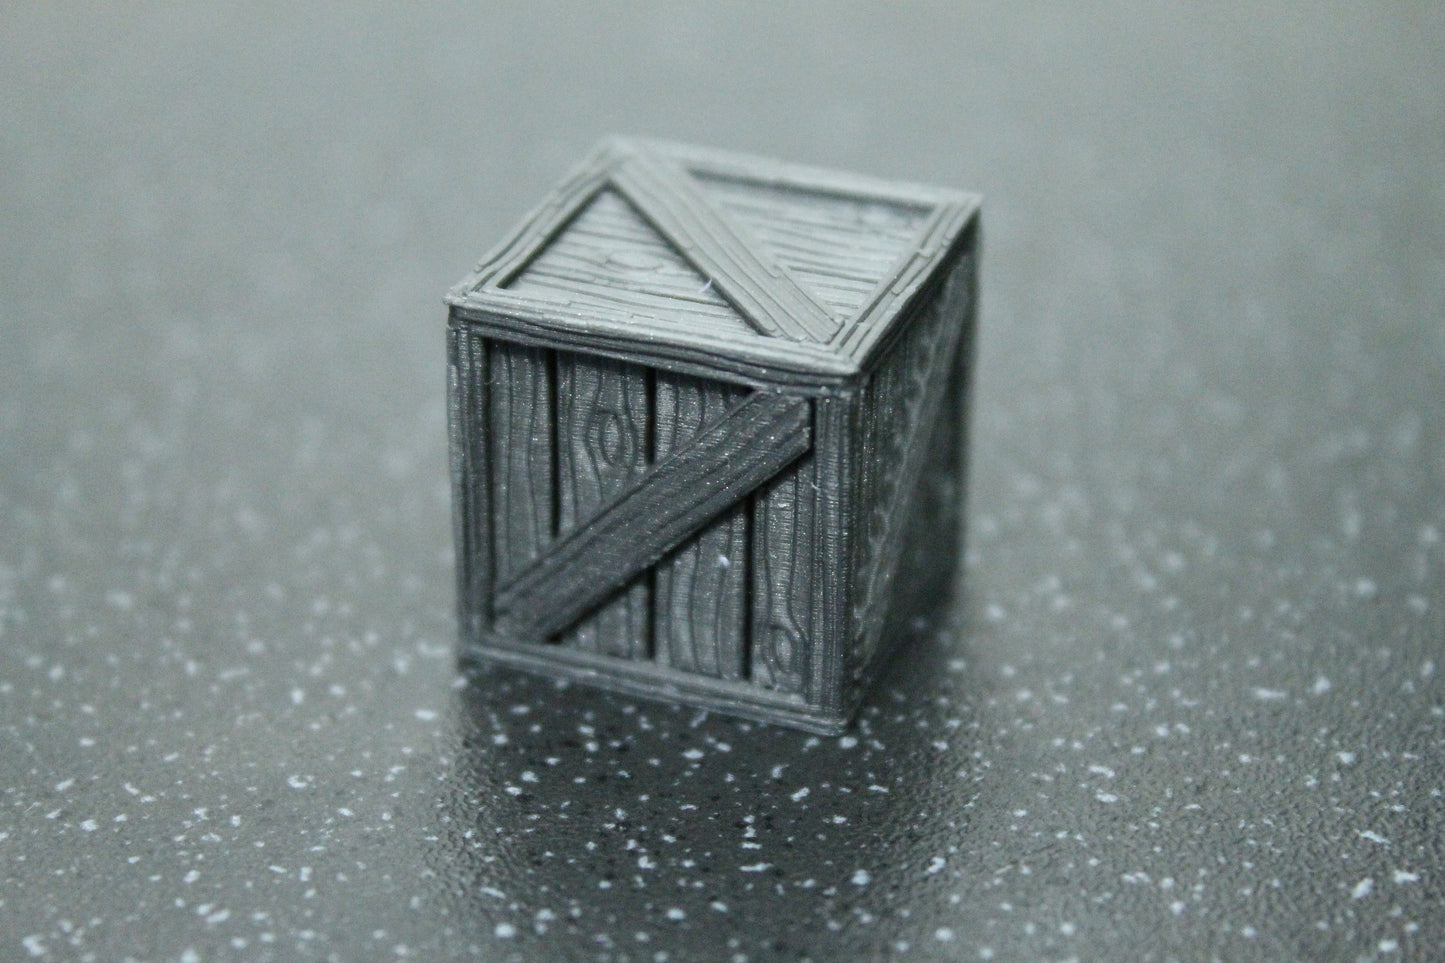 10 x Crates for tabletop games / Terrain / DnD Gloomhaven Warhammer & more! / Crate / 28mm / Wargaming / RPG / Dungeons and Dragons